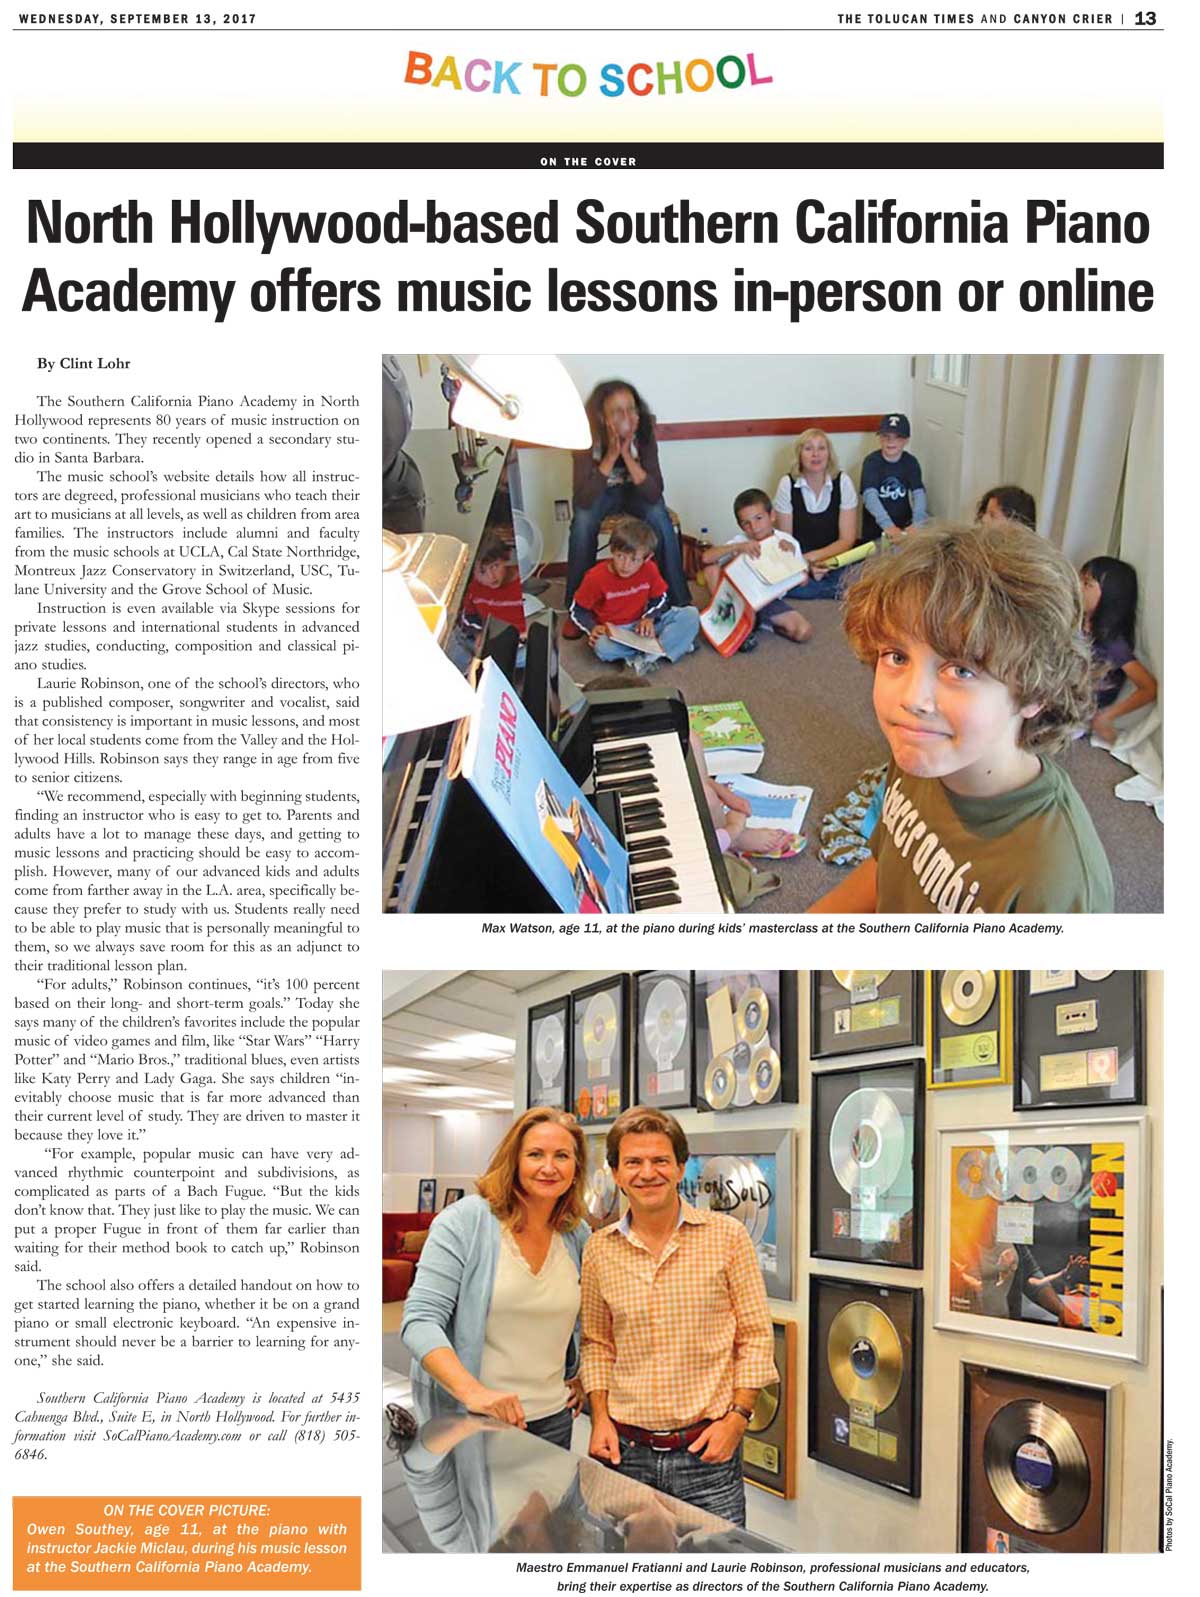 SoCal Piano Academy in Tolucan Times